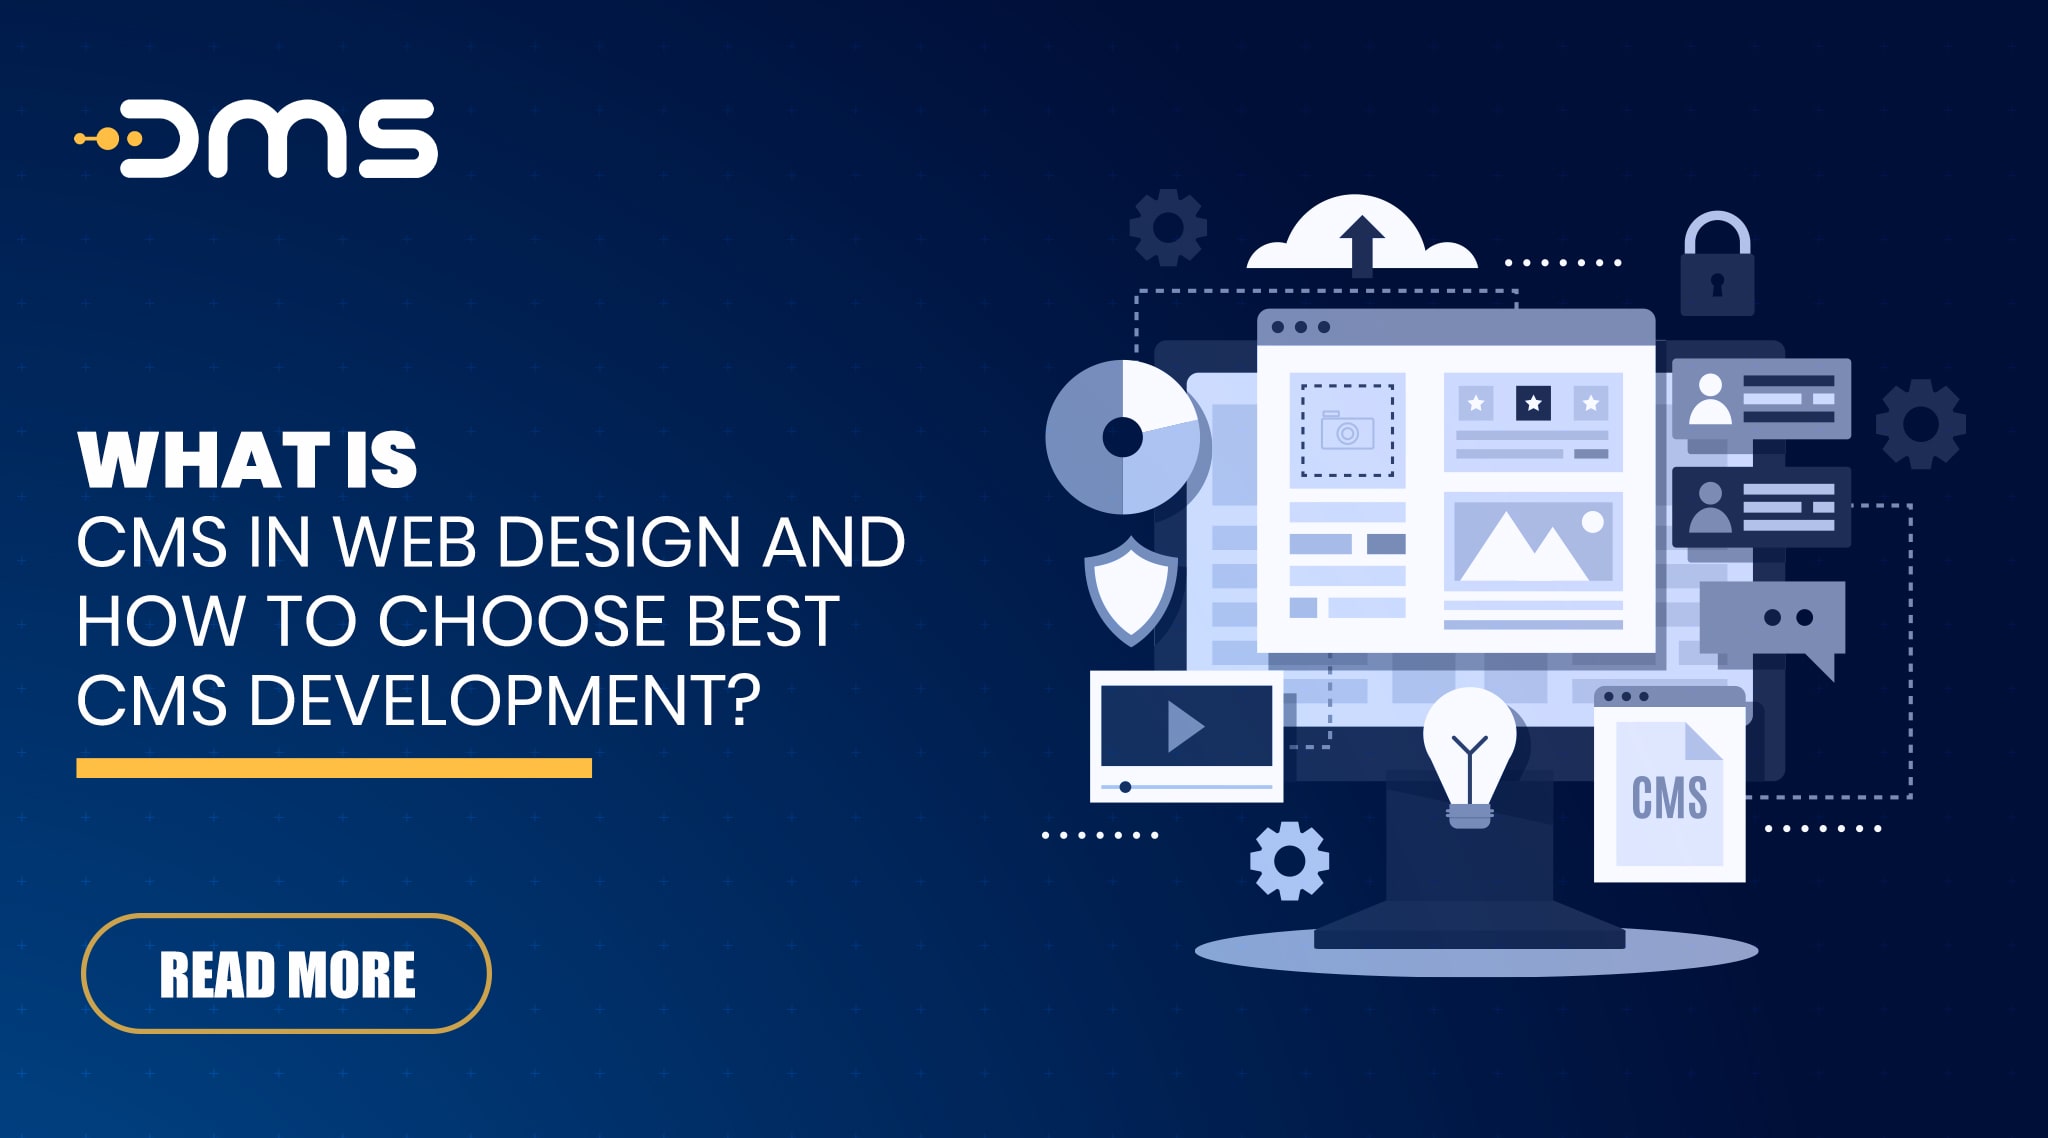 What is CMS in web design and how to choose the best CMS Development?